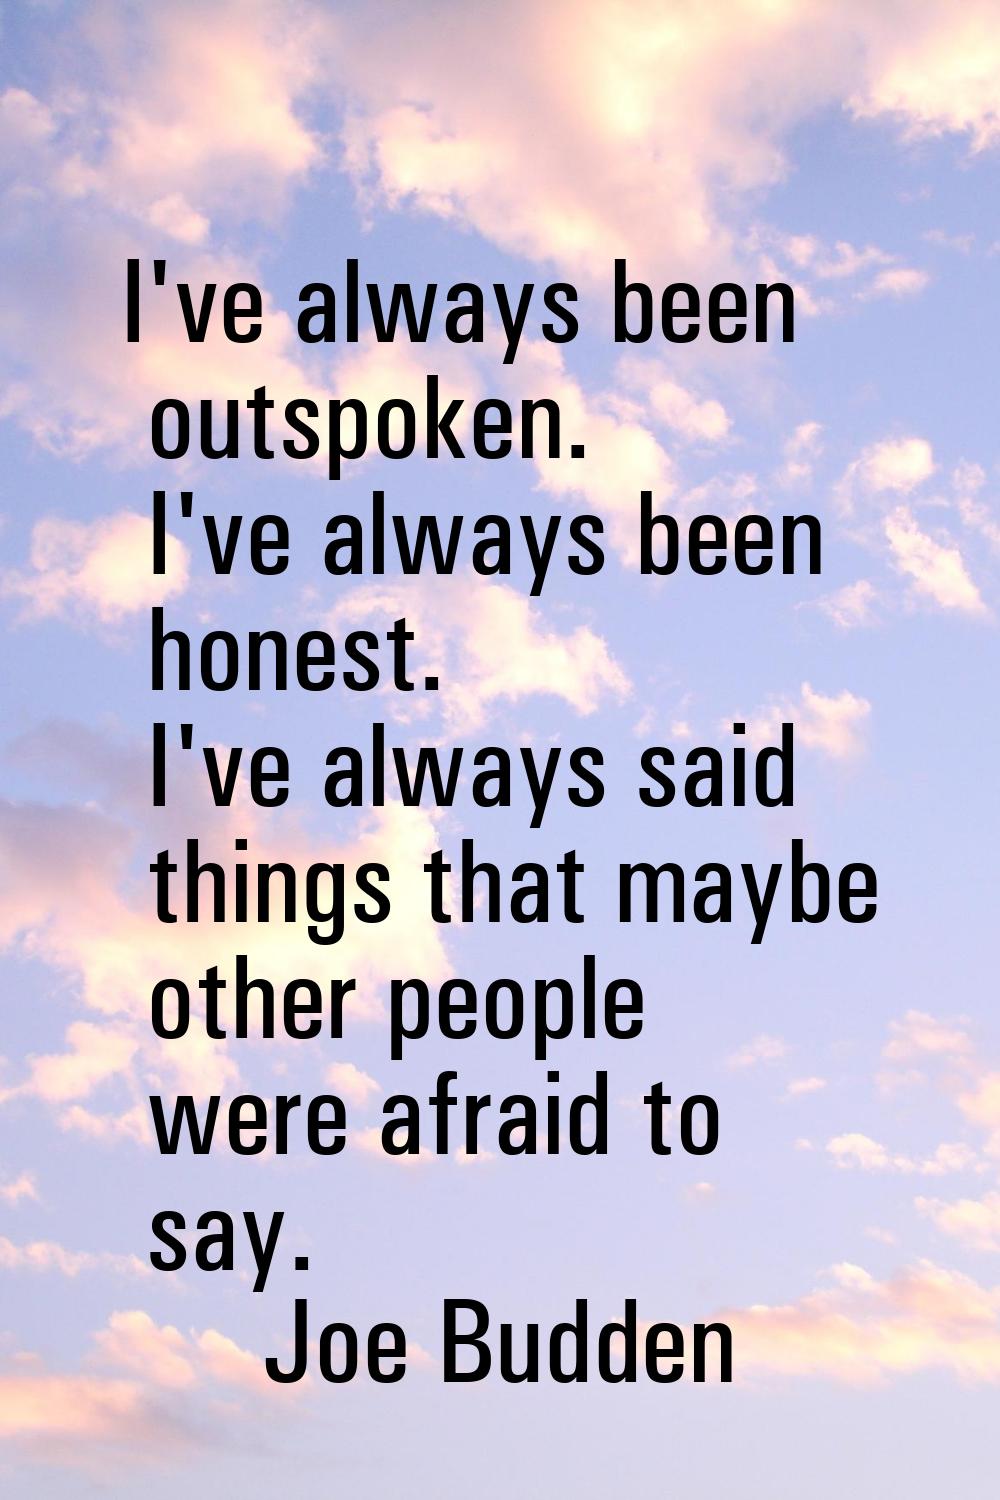 I've always been outspoken. I've always been honest. I've always said things that maybe other peopl